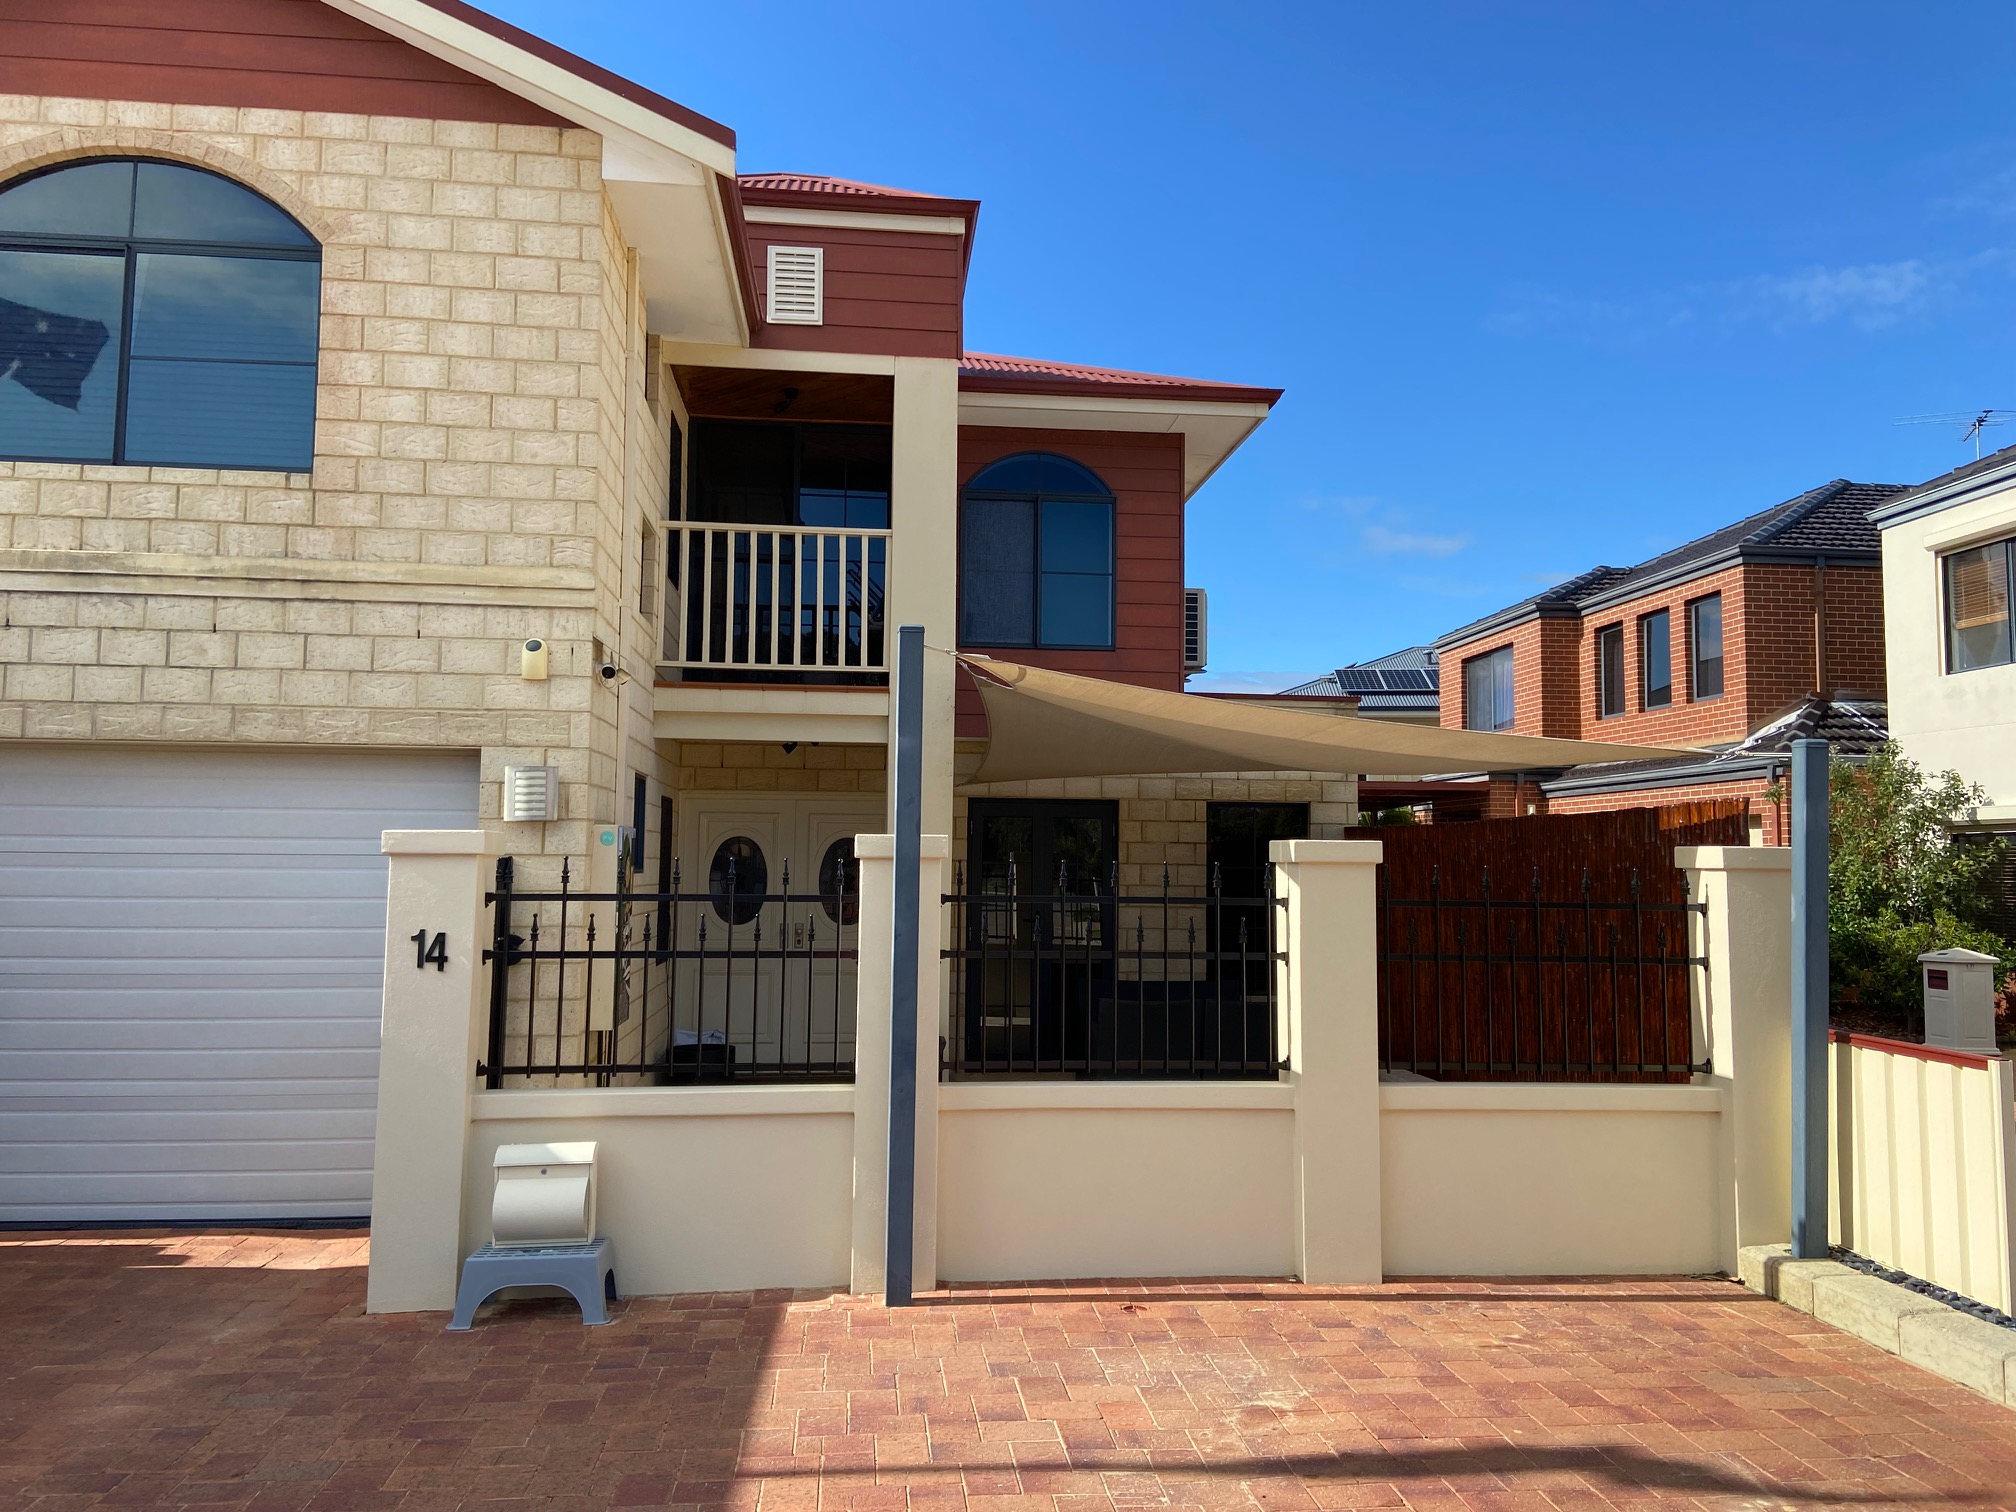 Tube Fencing and Gate Installation in Joondalup